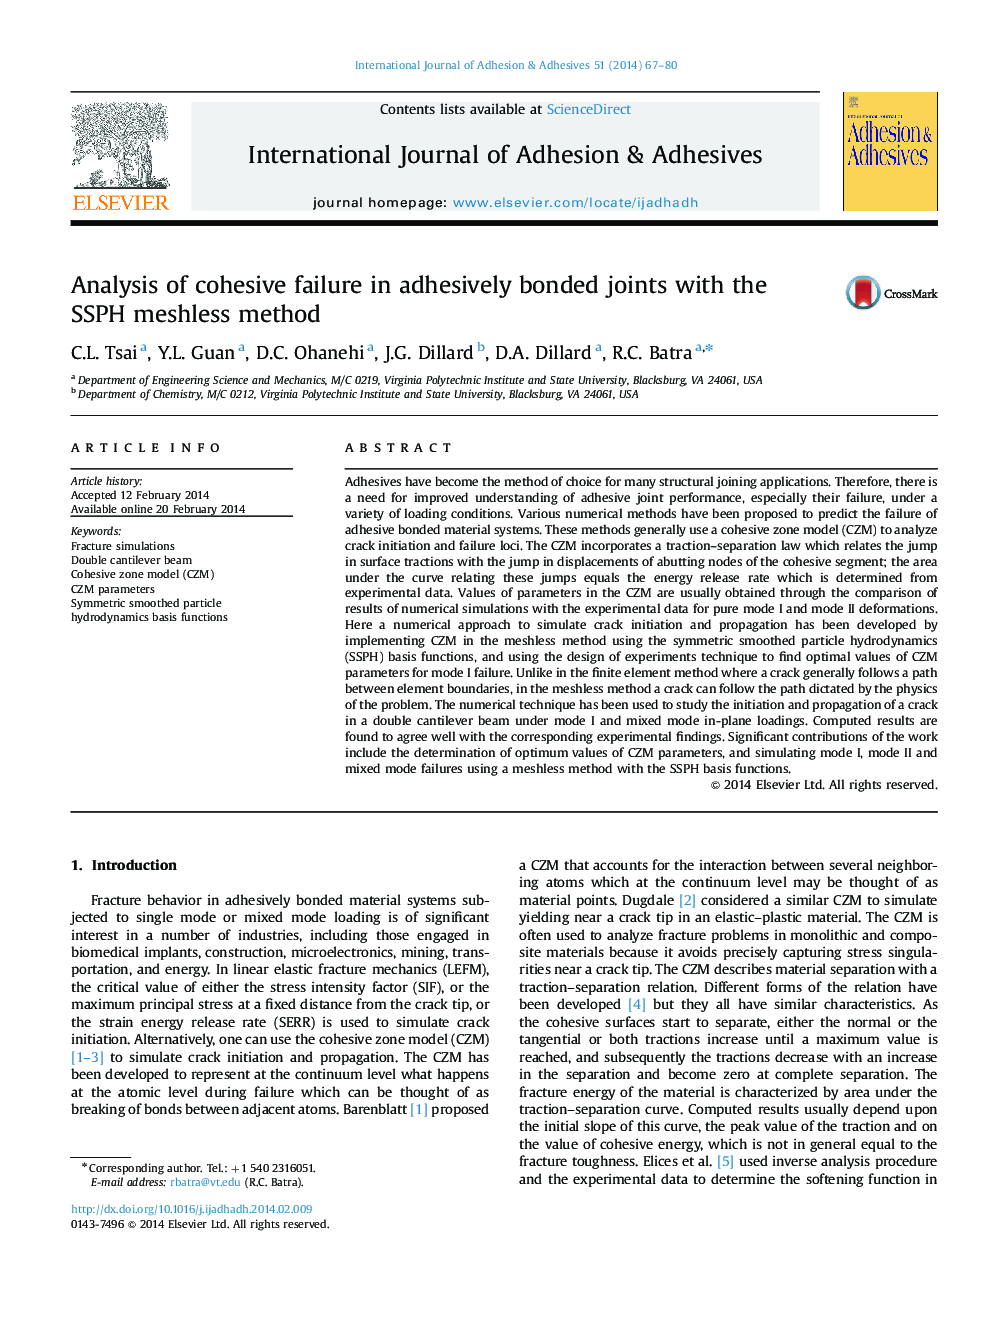 Analysis of cohesive failure in adhesively bonded joints with the SSPH meshless method